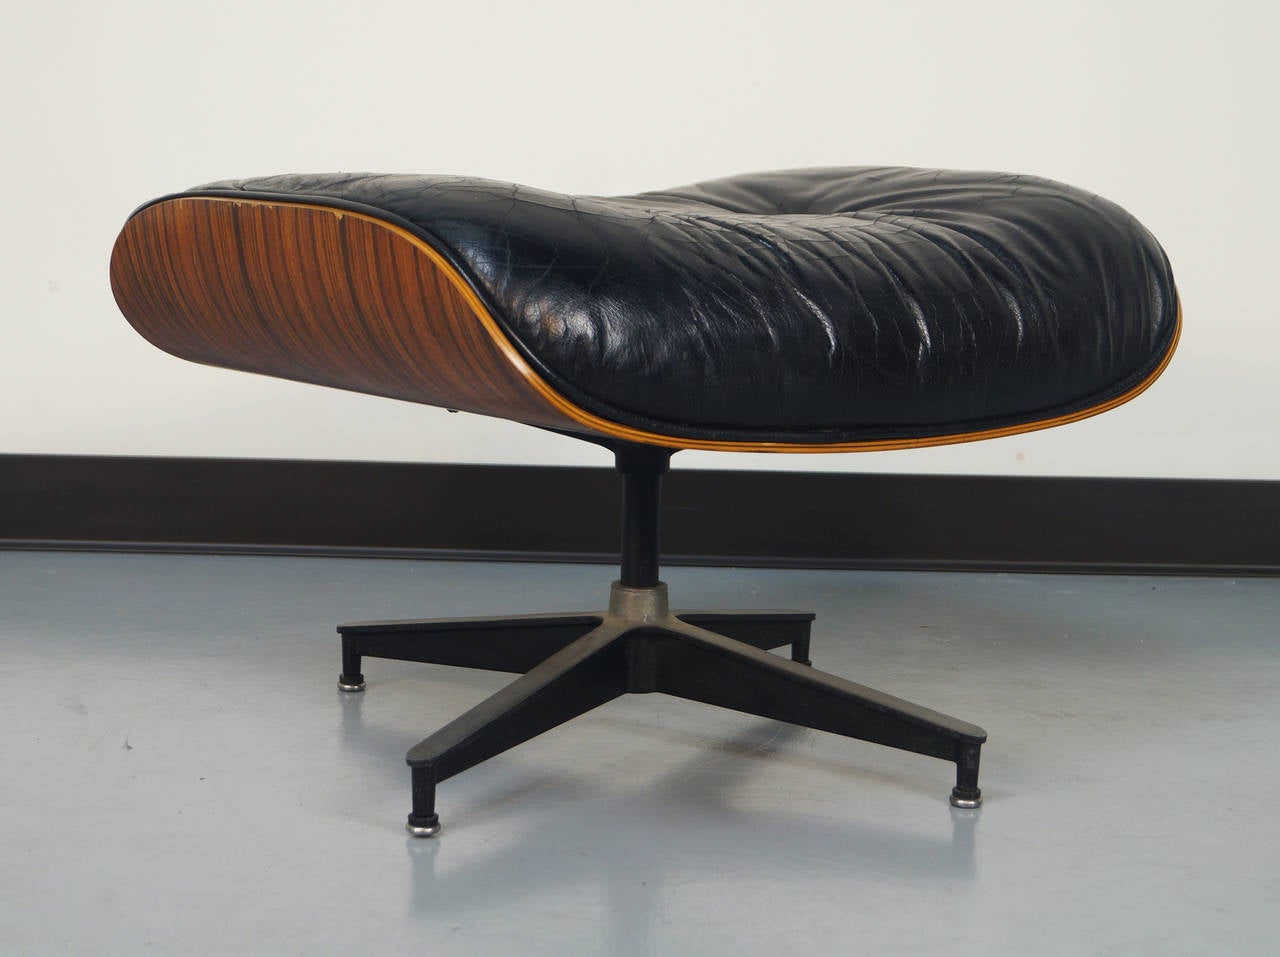 Late 20th Century Rosewood Charles Eames Lounge Chair and Ottoman for Herman Miller